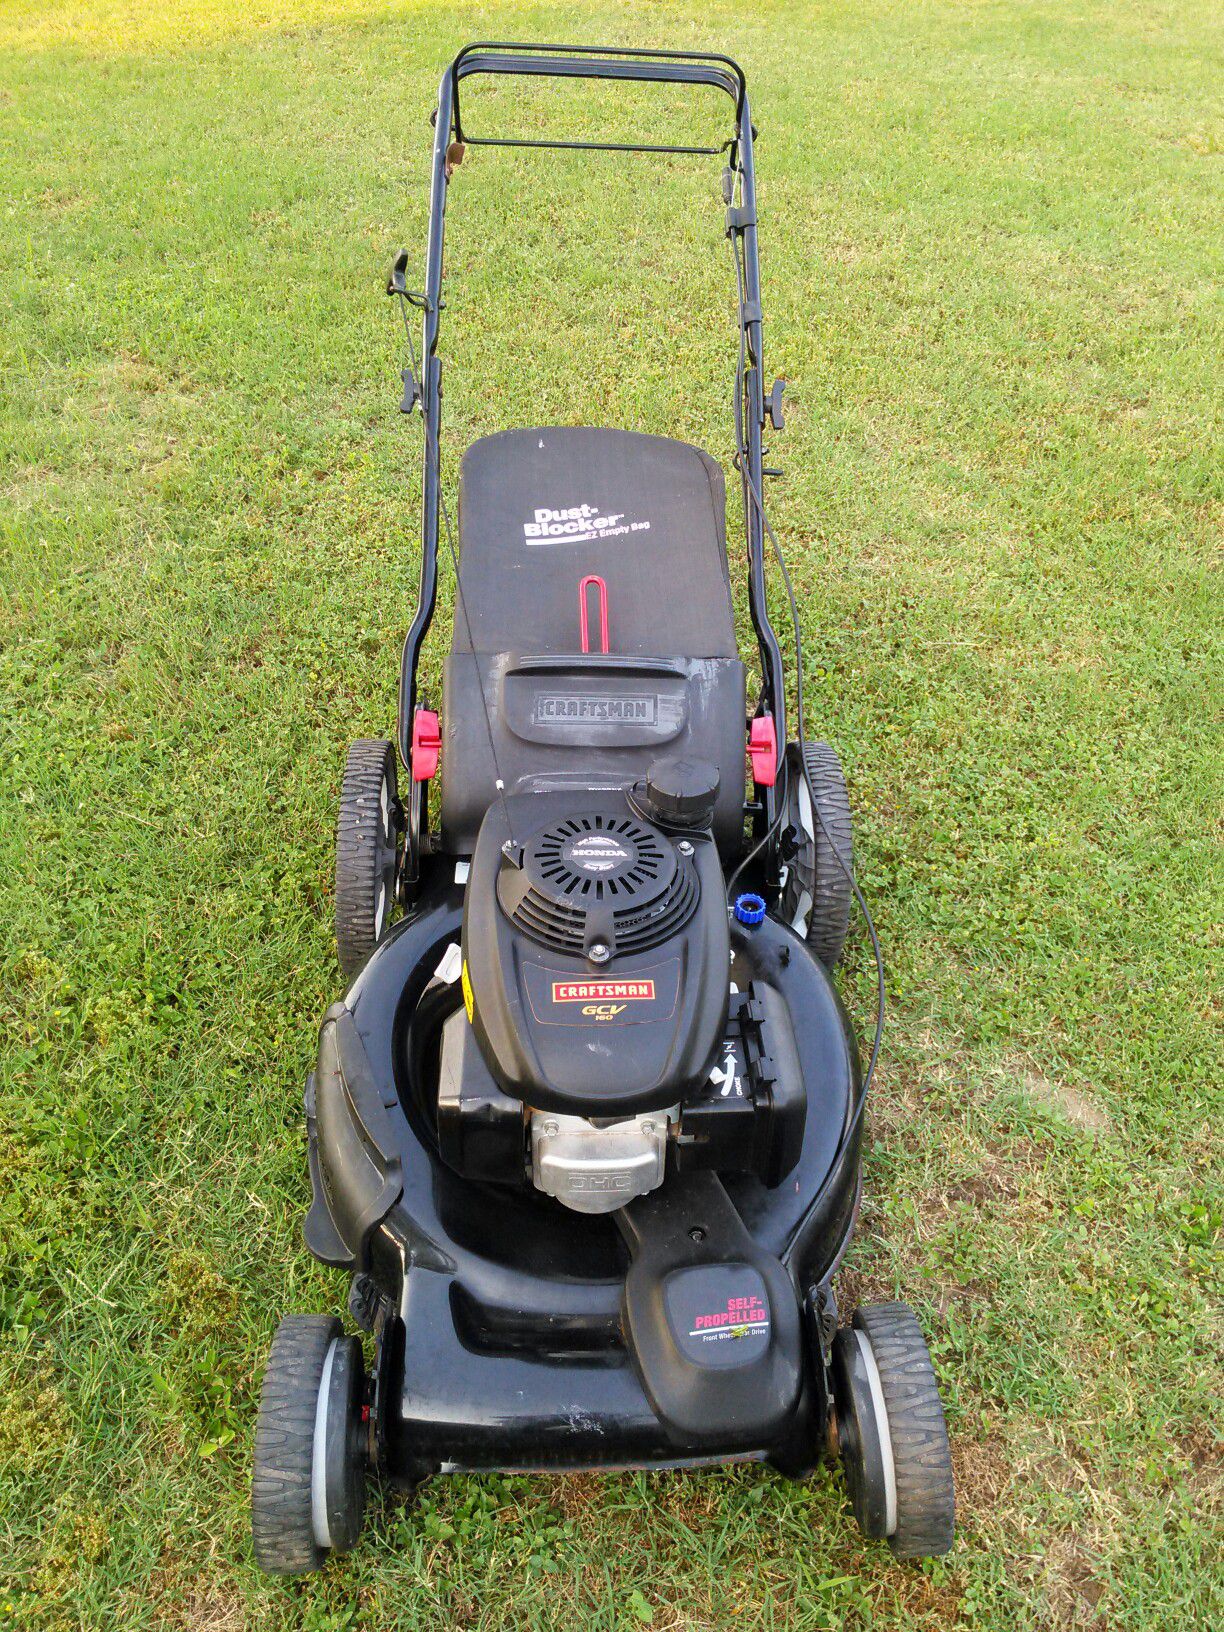 Very strong Craftsman 6.75 horsepower self-propelled lawn mower with Honda engine works absolutely great guaranteed to turn on on first pull